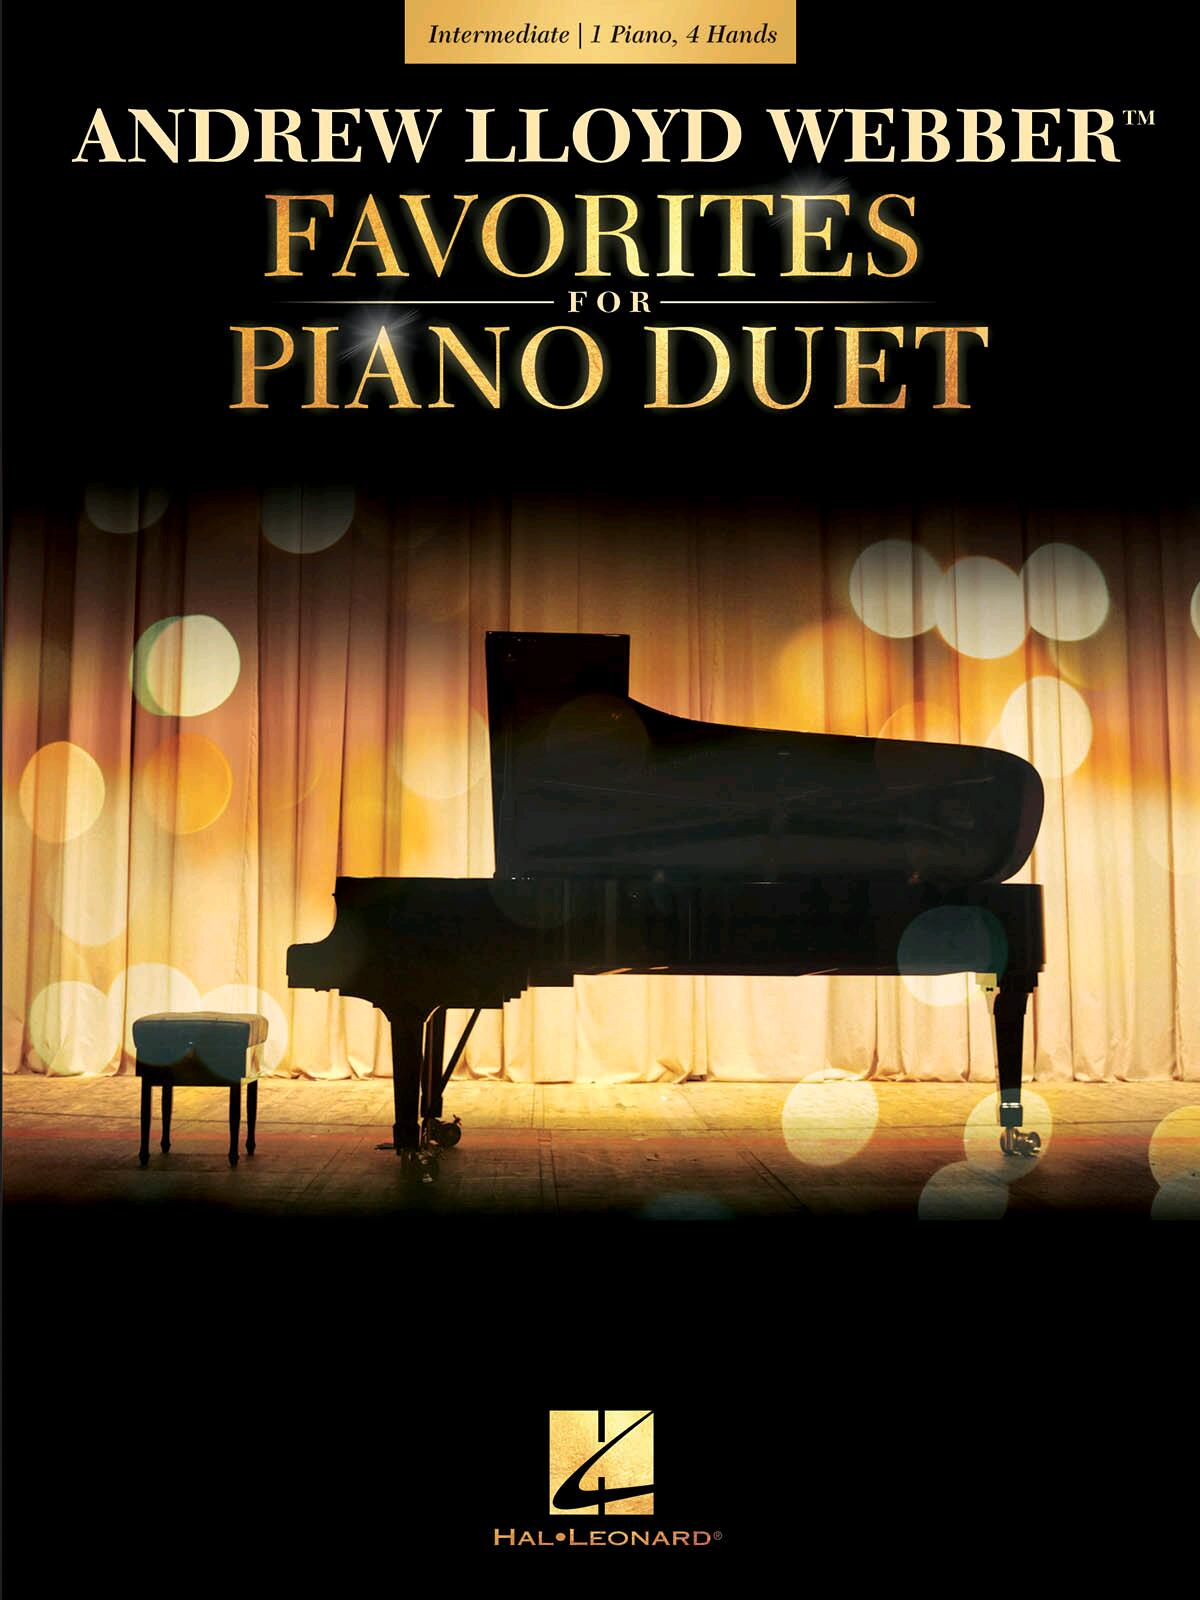 Andrew Lloyd Webber Favorites for Piano Duet : photo 1